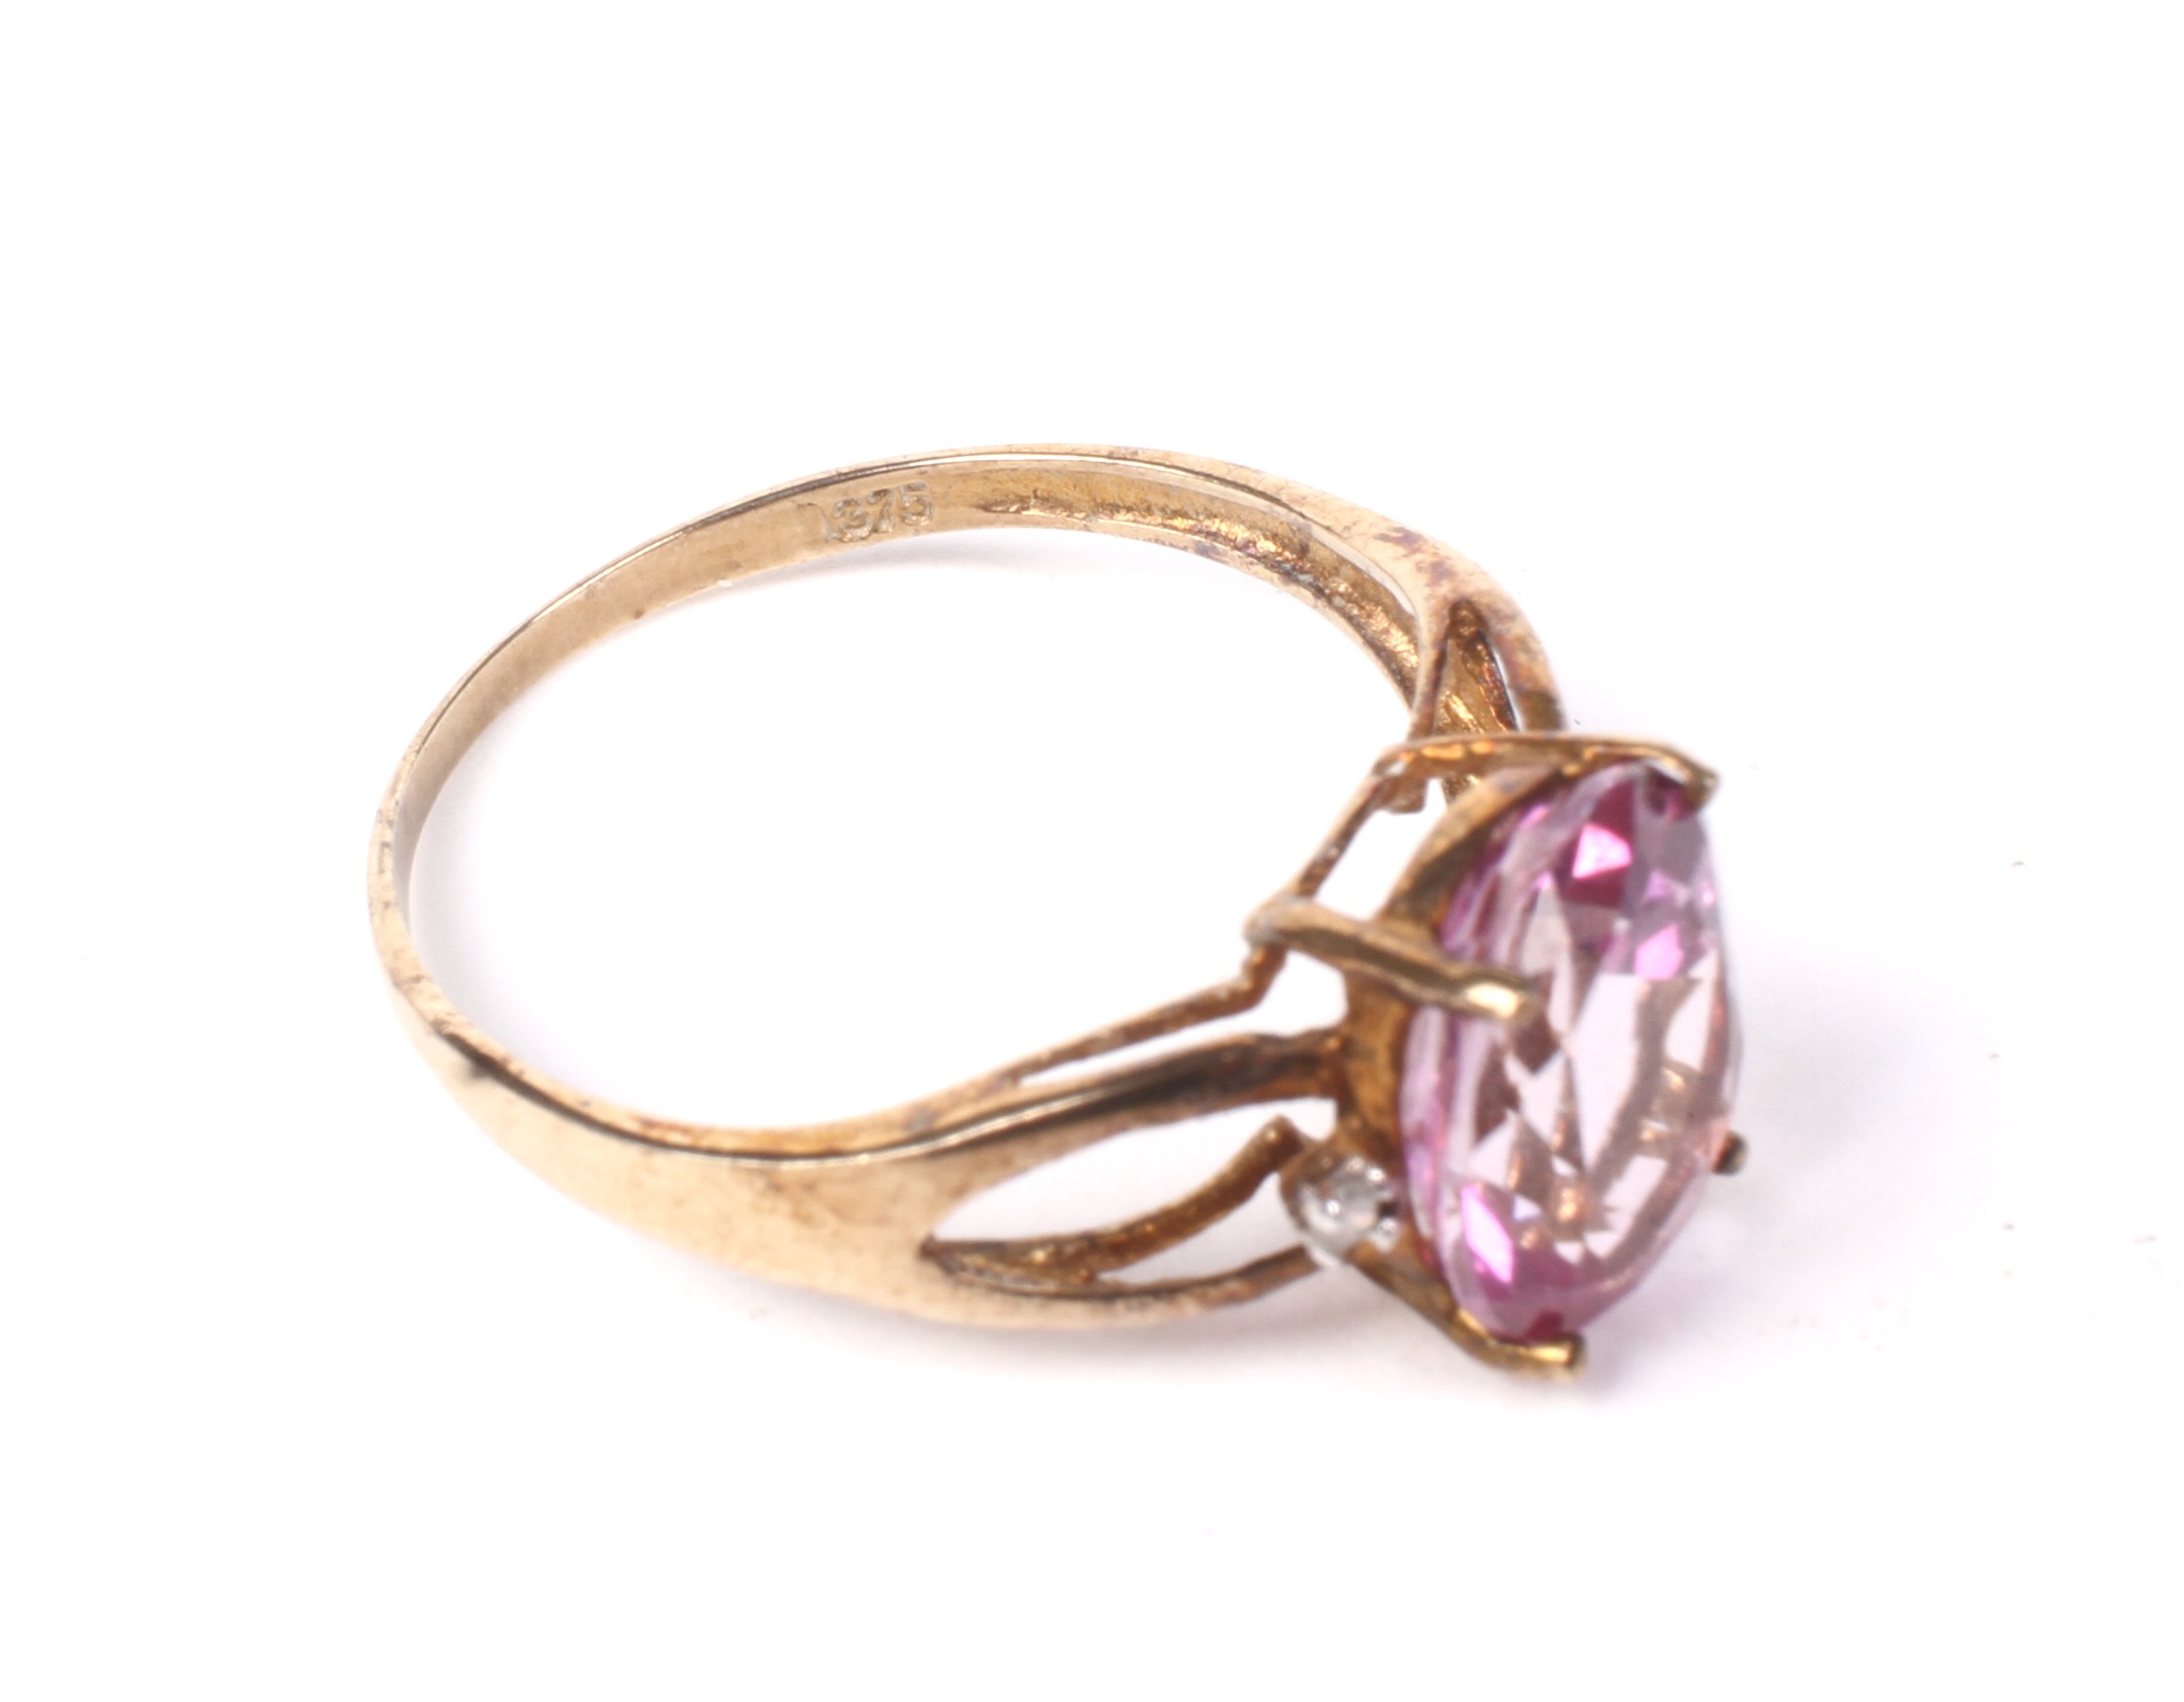 A treated-pink topaz single stone ring and a similar vintage pendant. - Image 3 of 3